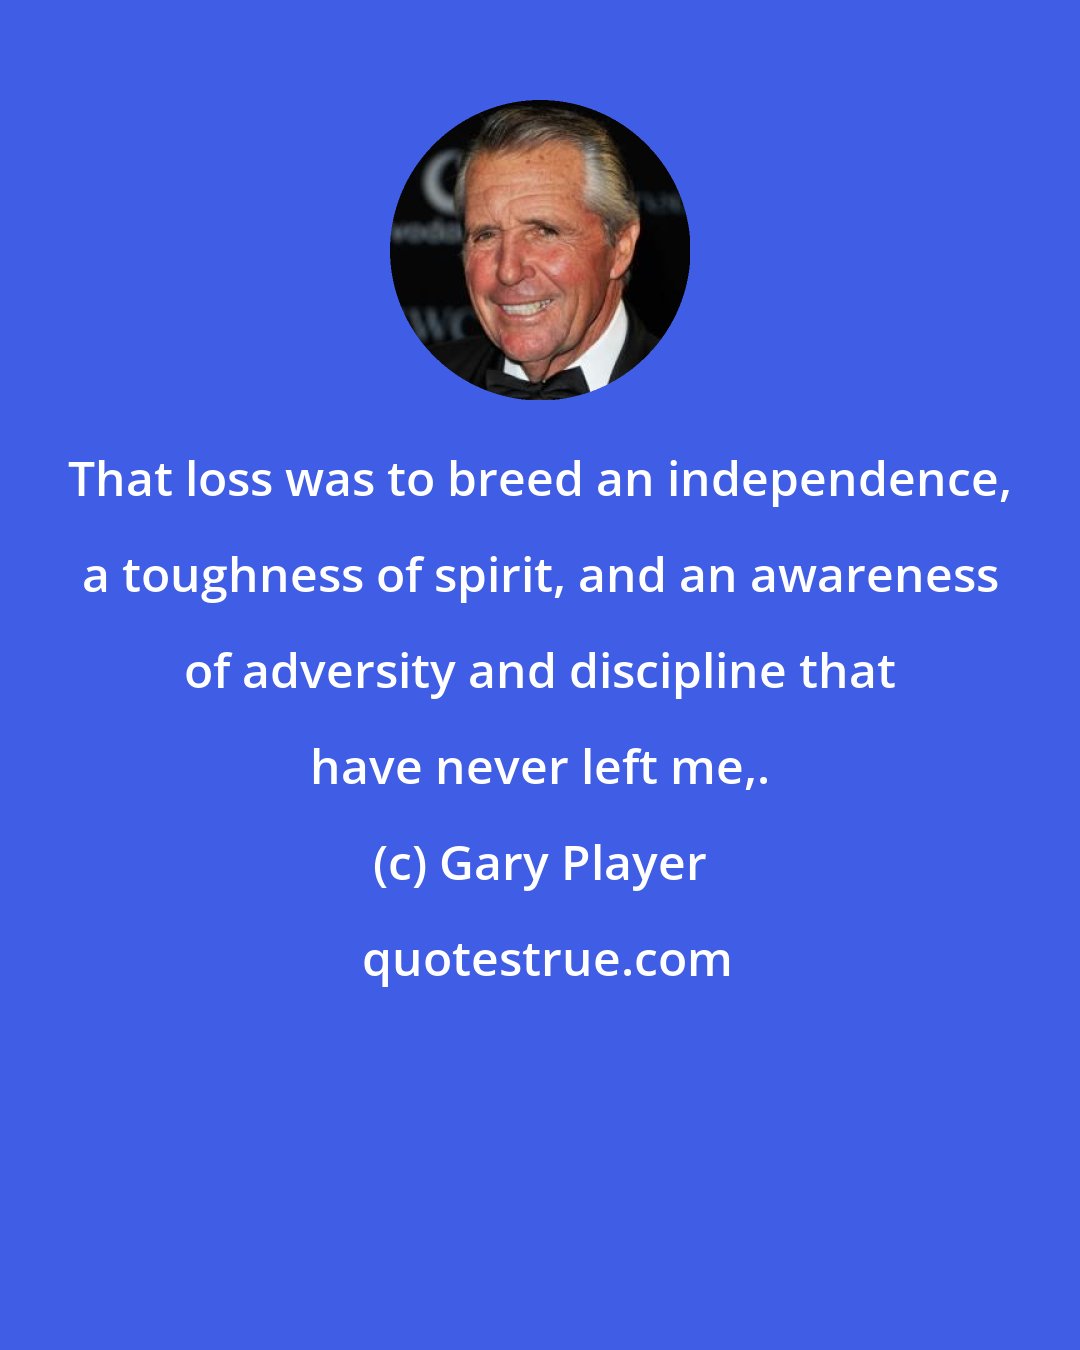 Gary Player: That loss was to breed an independence, a toughness of spirit, and an awareness of adversity and discipline that have never left me,.